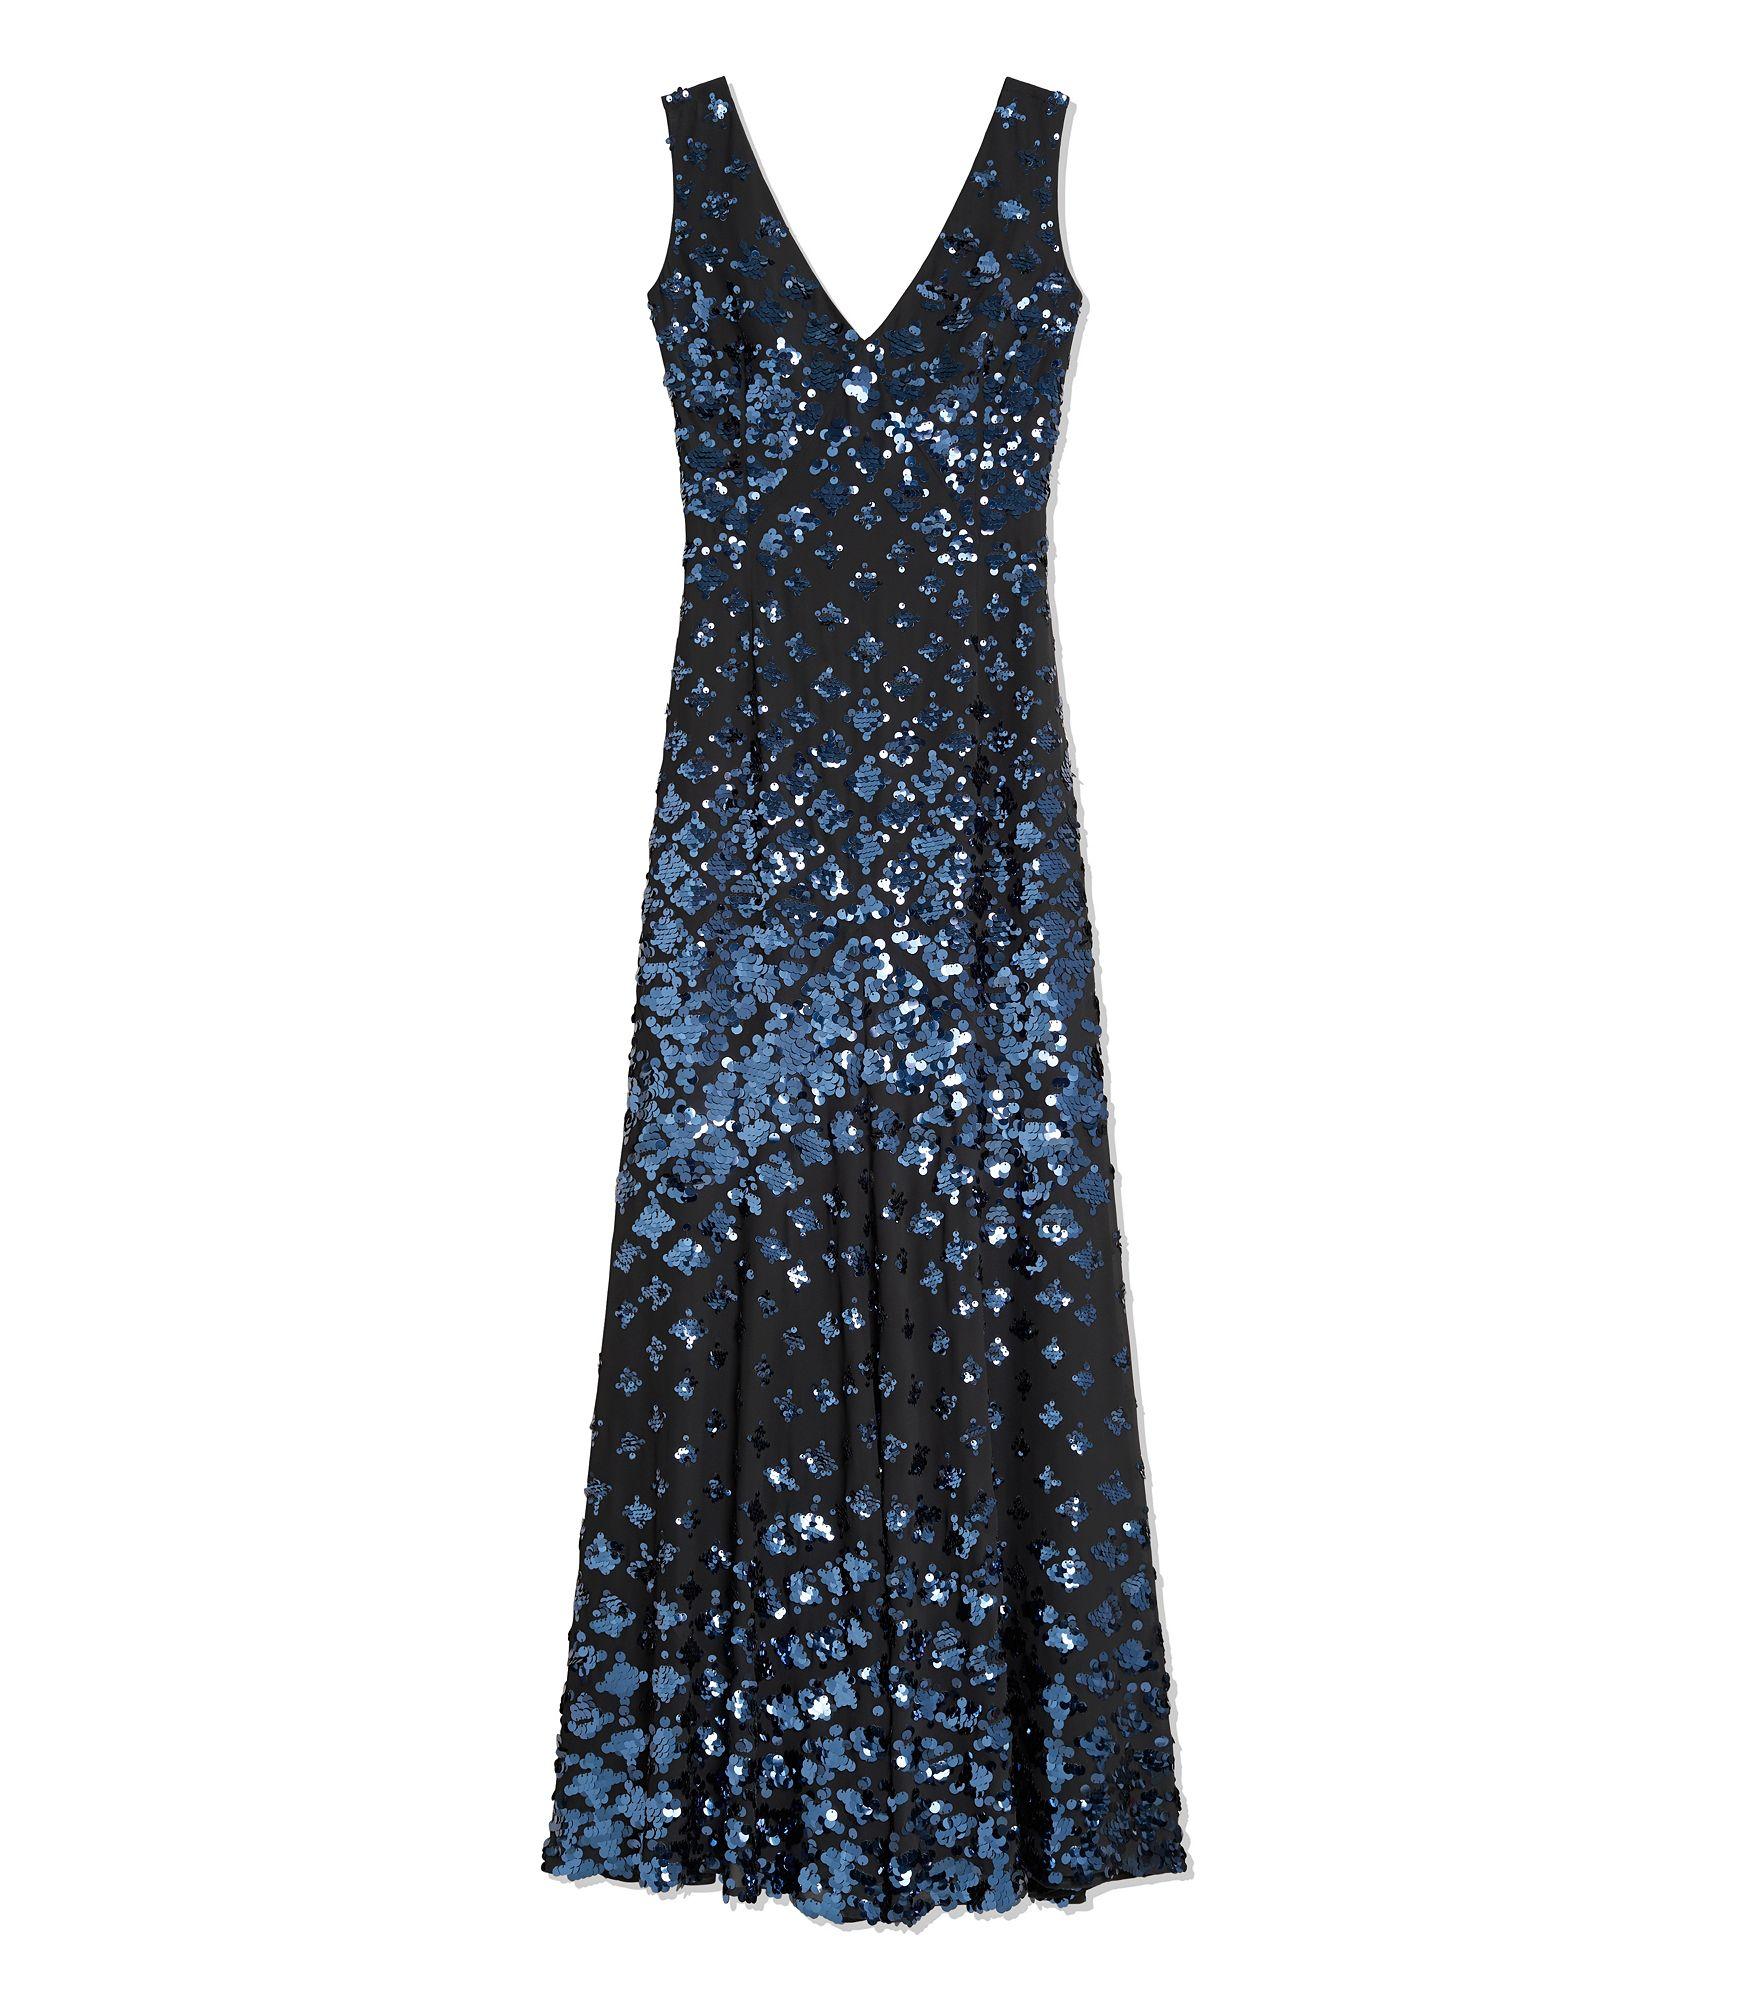 Tory Burch Allover Sequin Dress in Black | Lyst